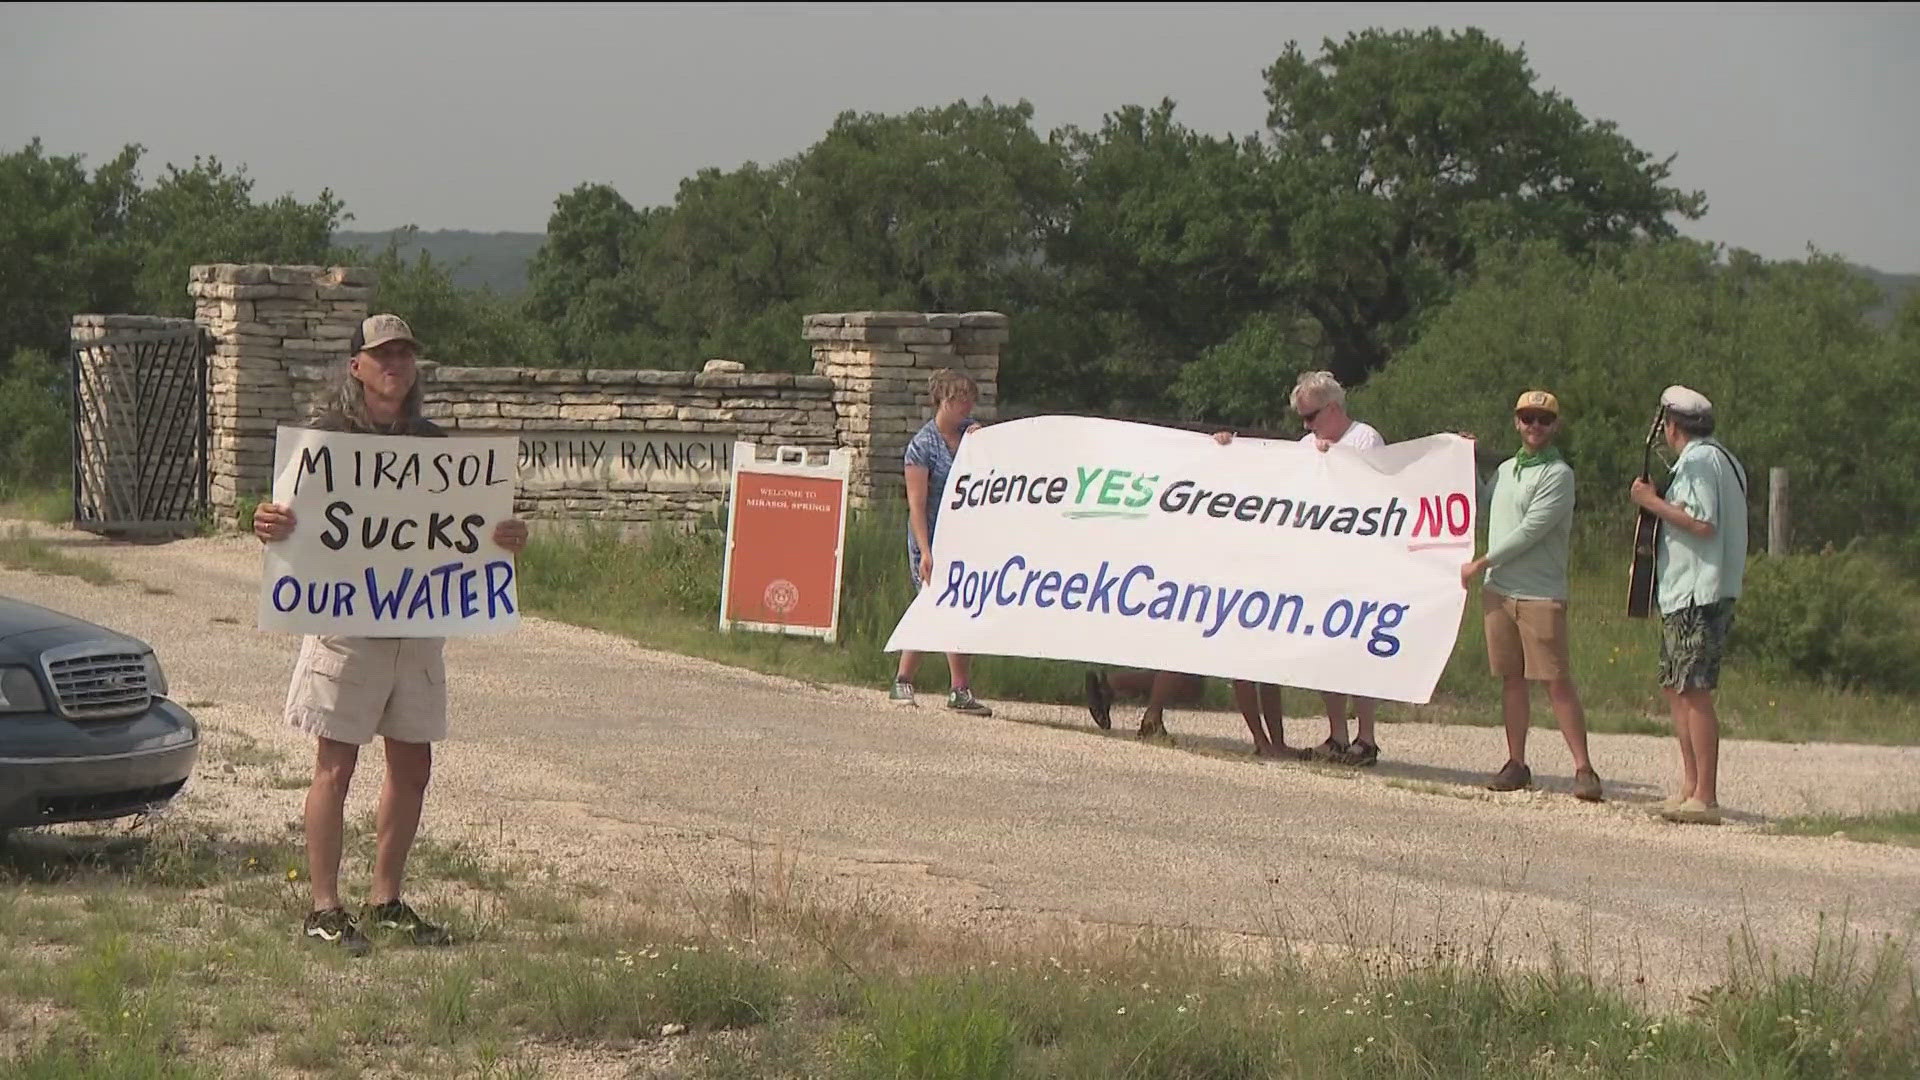 There's new opposition to a project along the Travis and Hays county line.